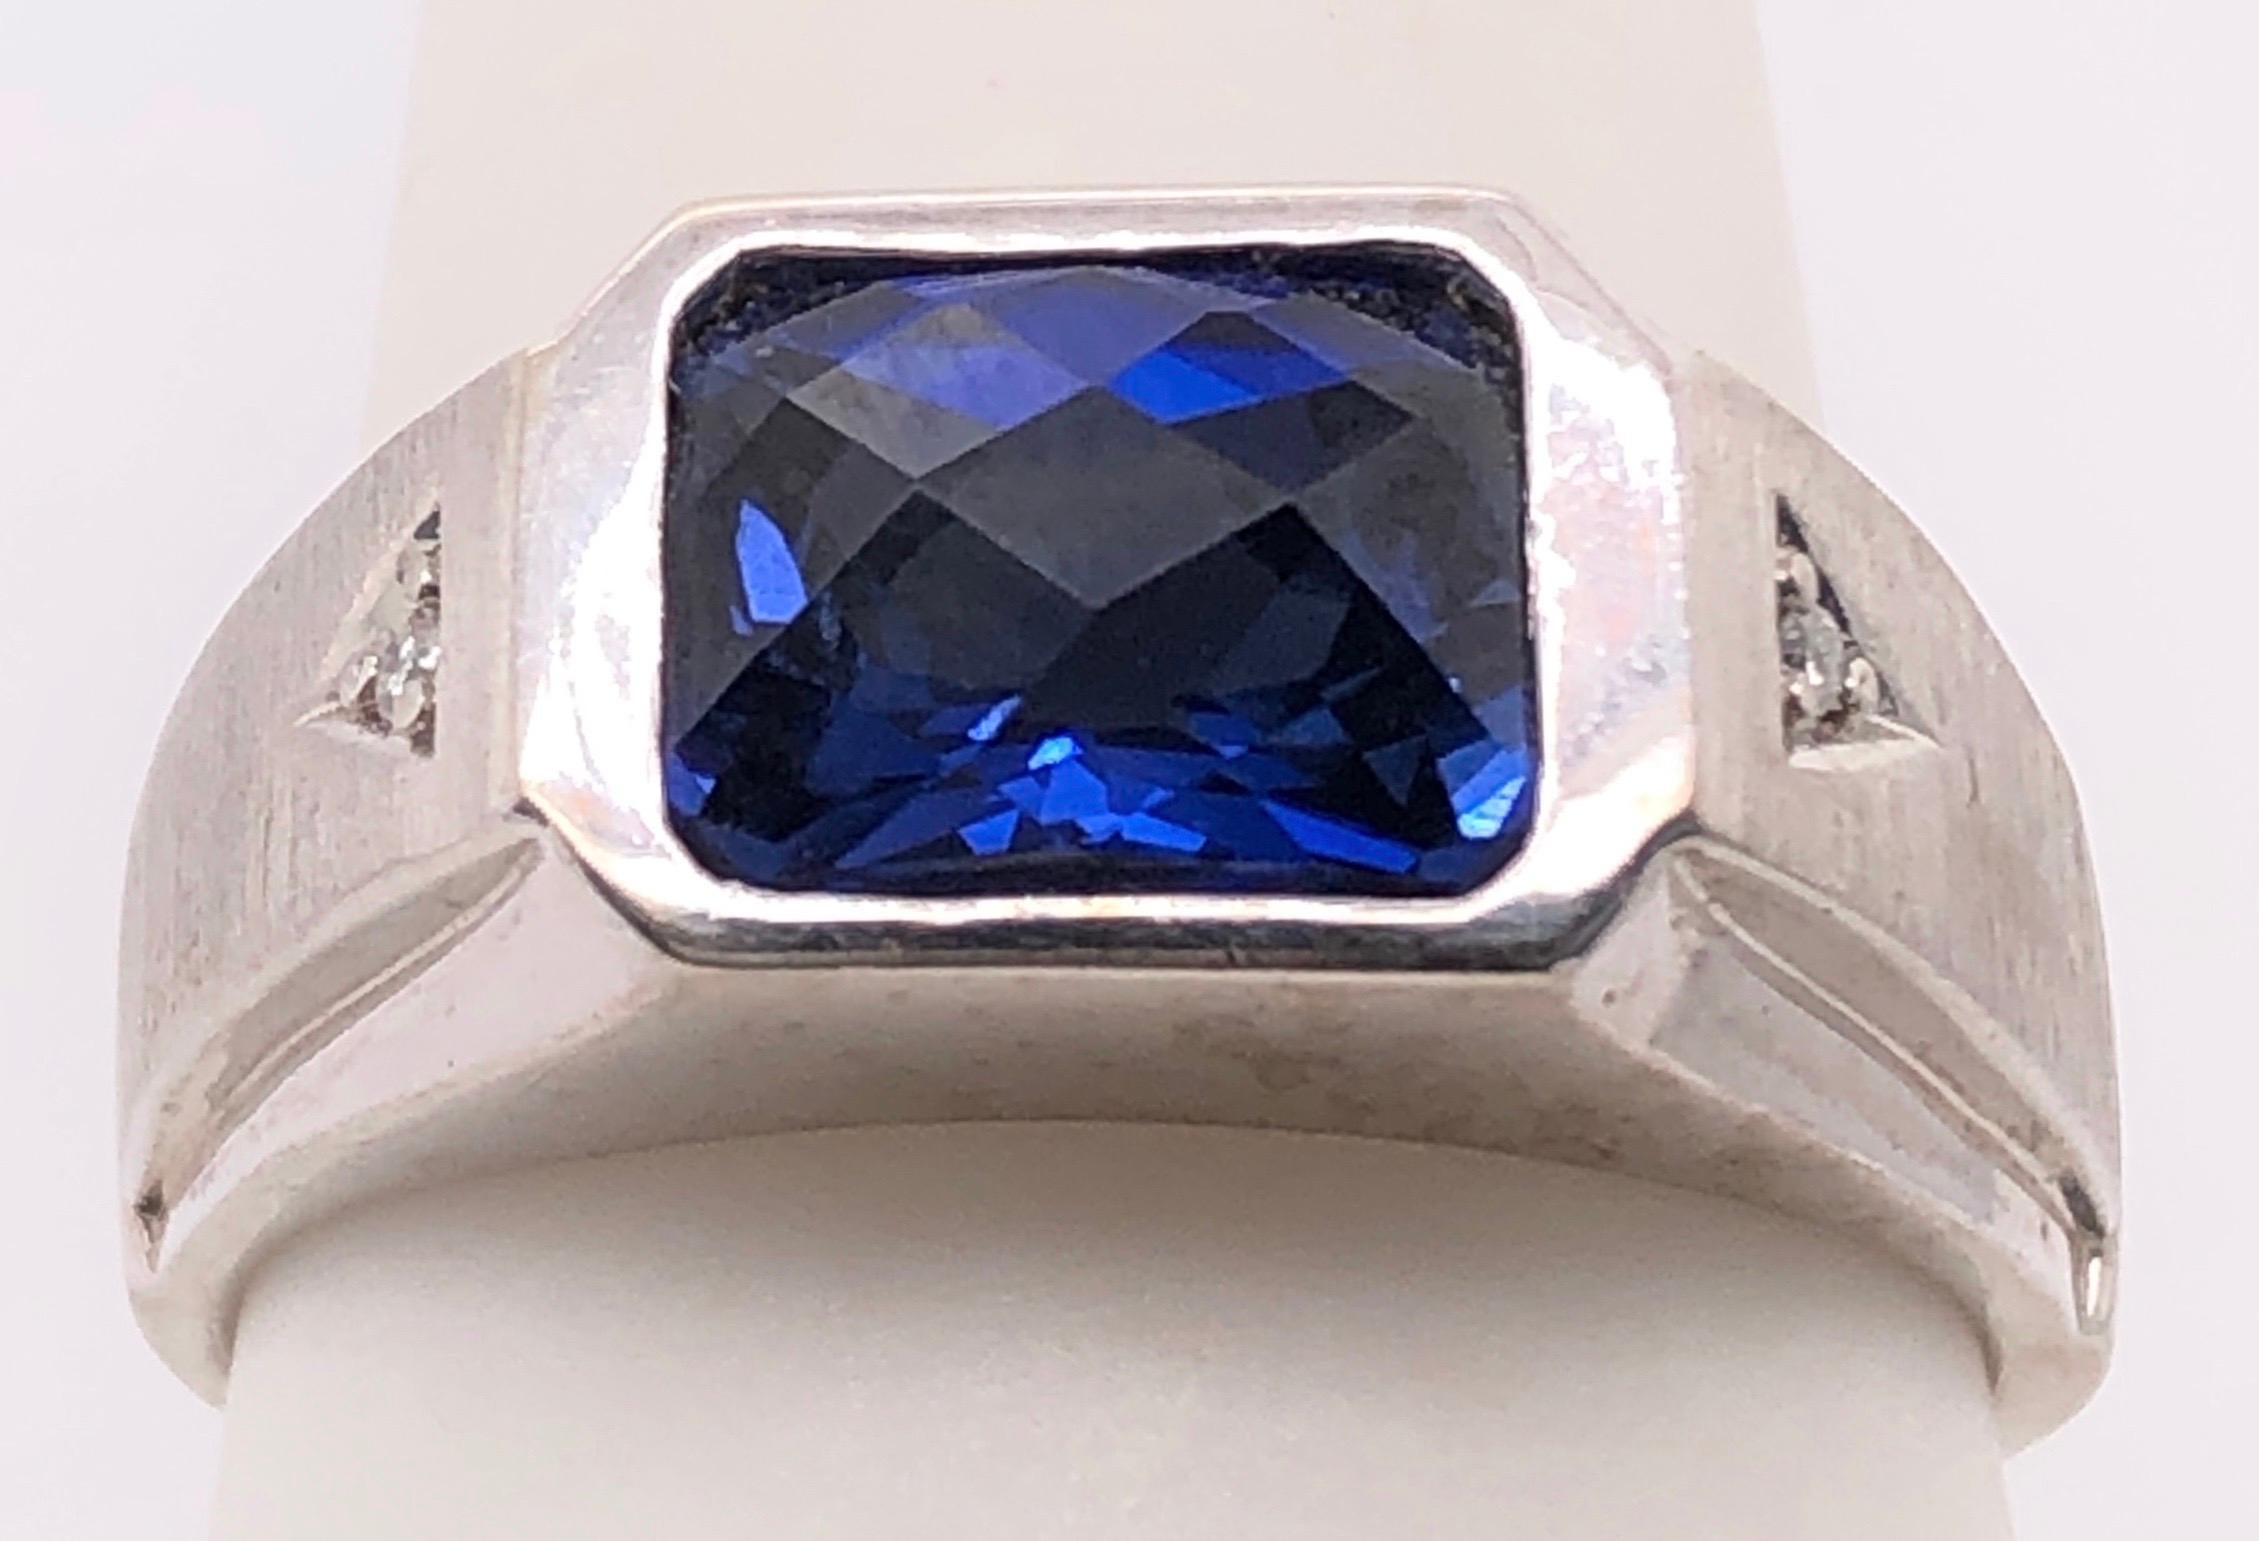 14 Karat White Gold Contemporary Sapphire Ring with Diamonds 0.05 TDW.
Size 10
8.90 grams total weight.